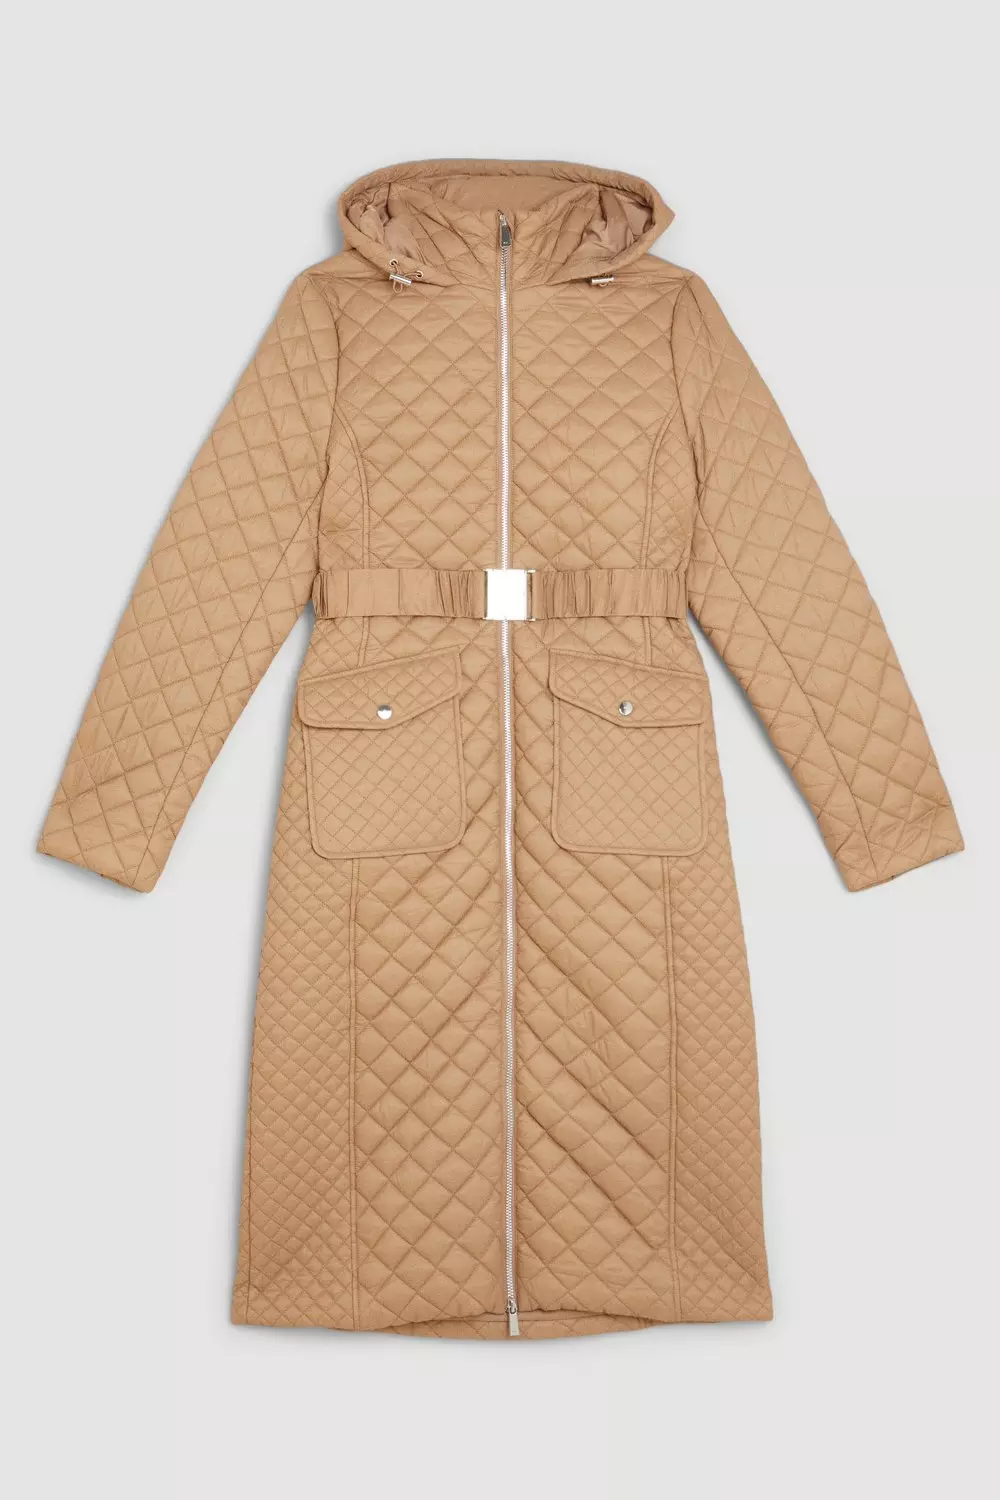 Dazzling Diamond-Quilted Coat by Studio EY